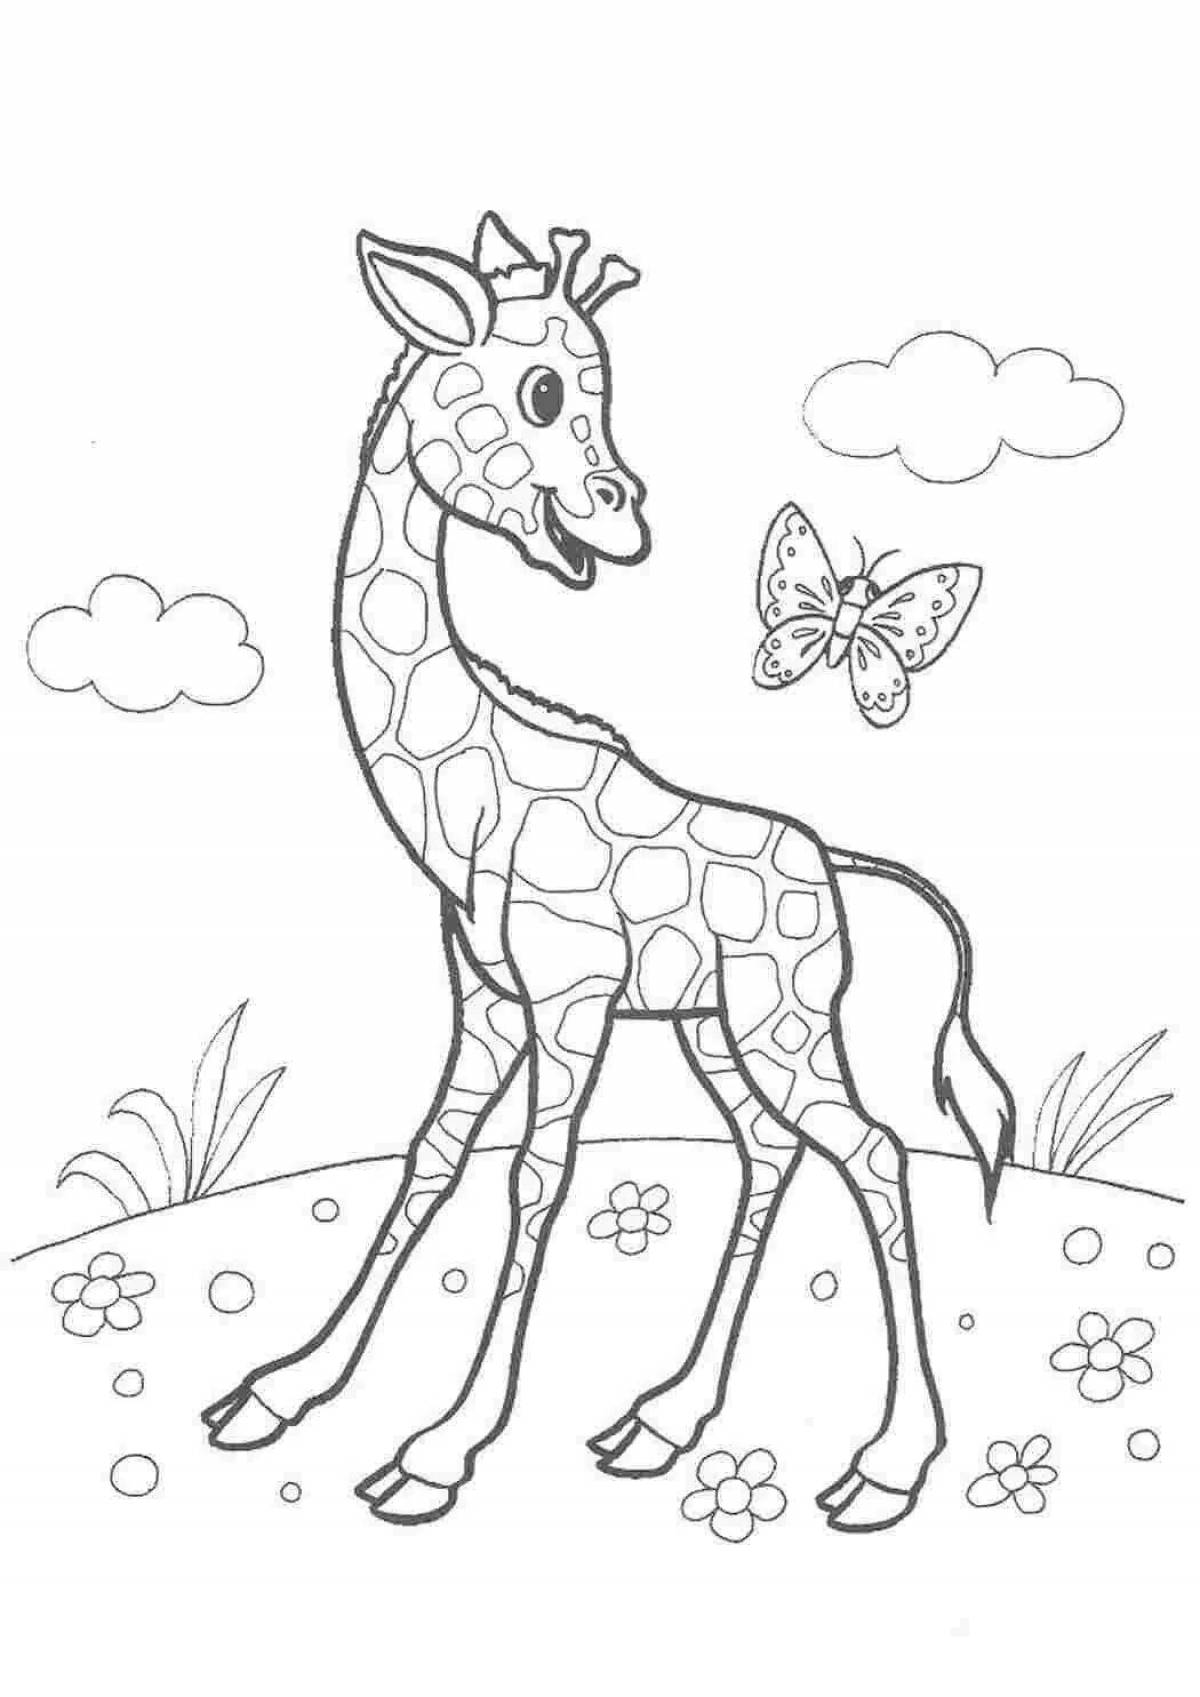 Funny coloring pages animals of hot countries for children 5 years old